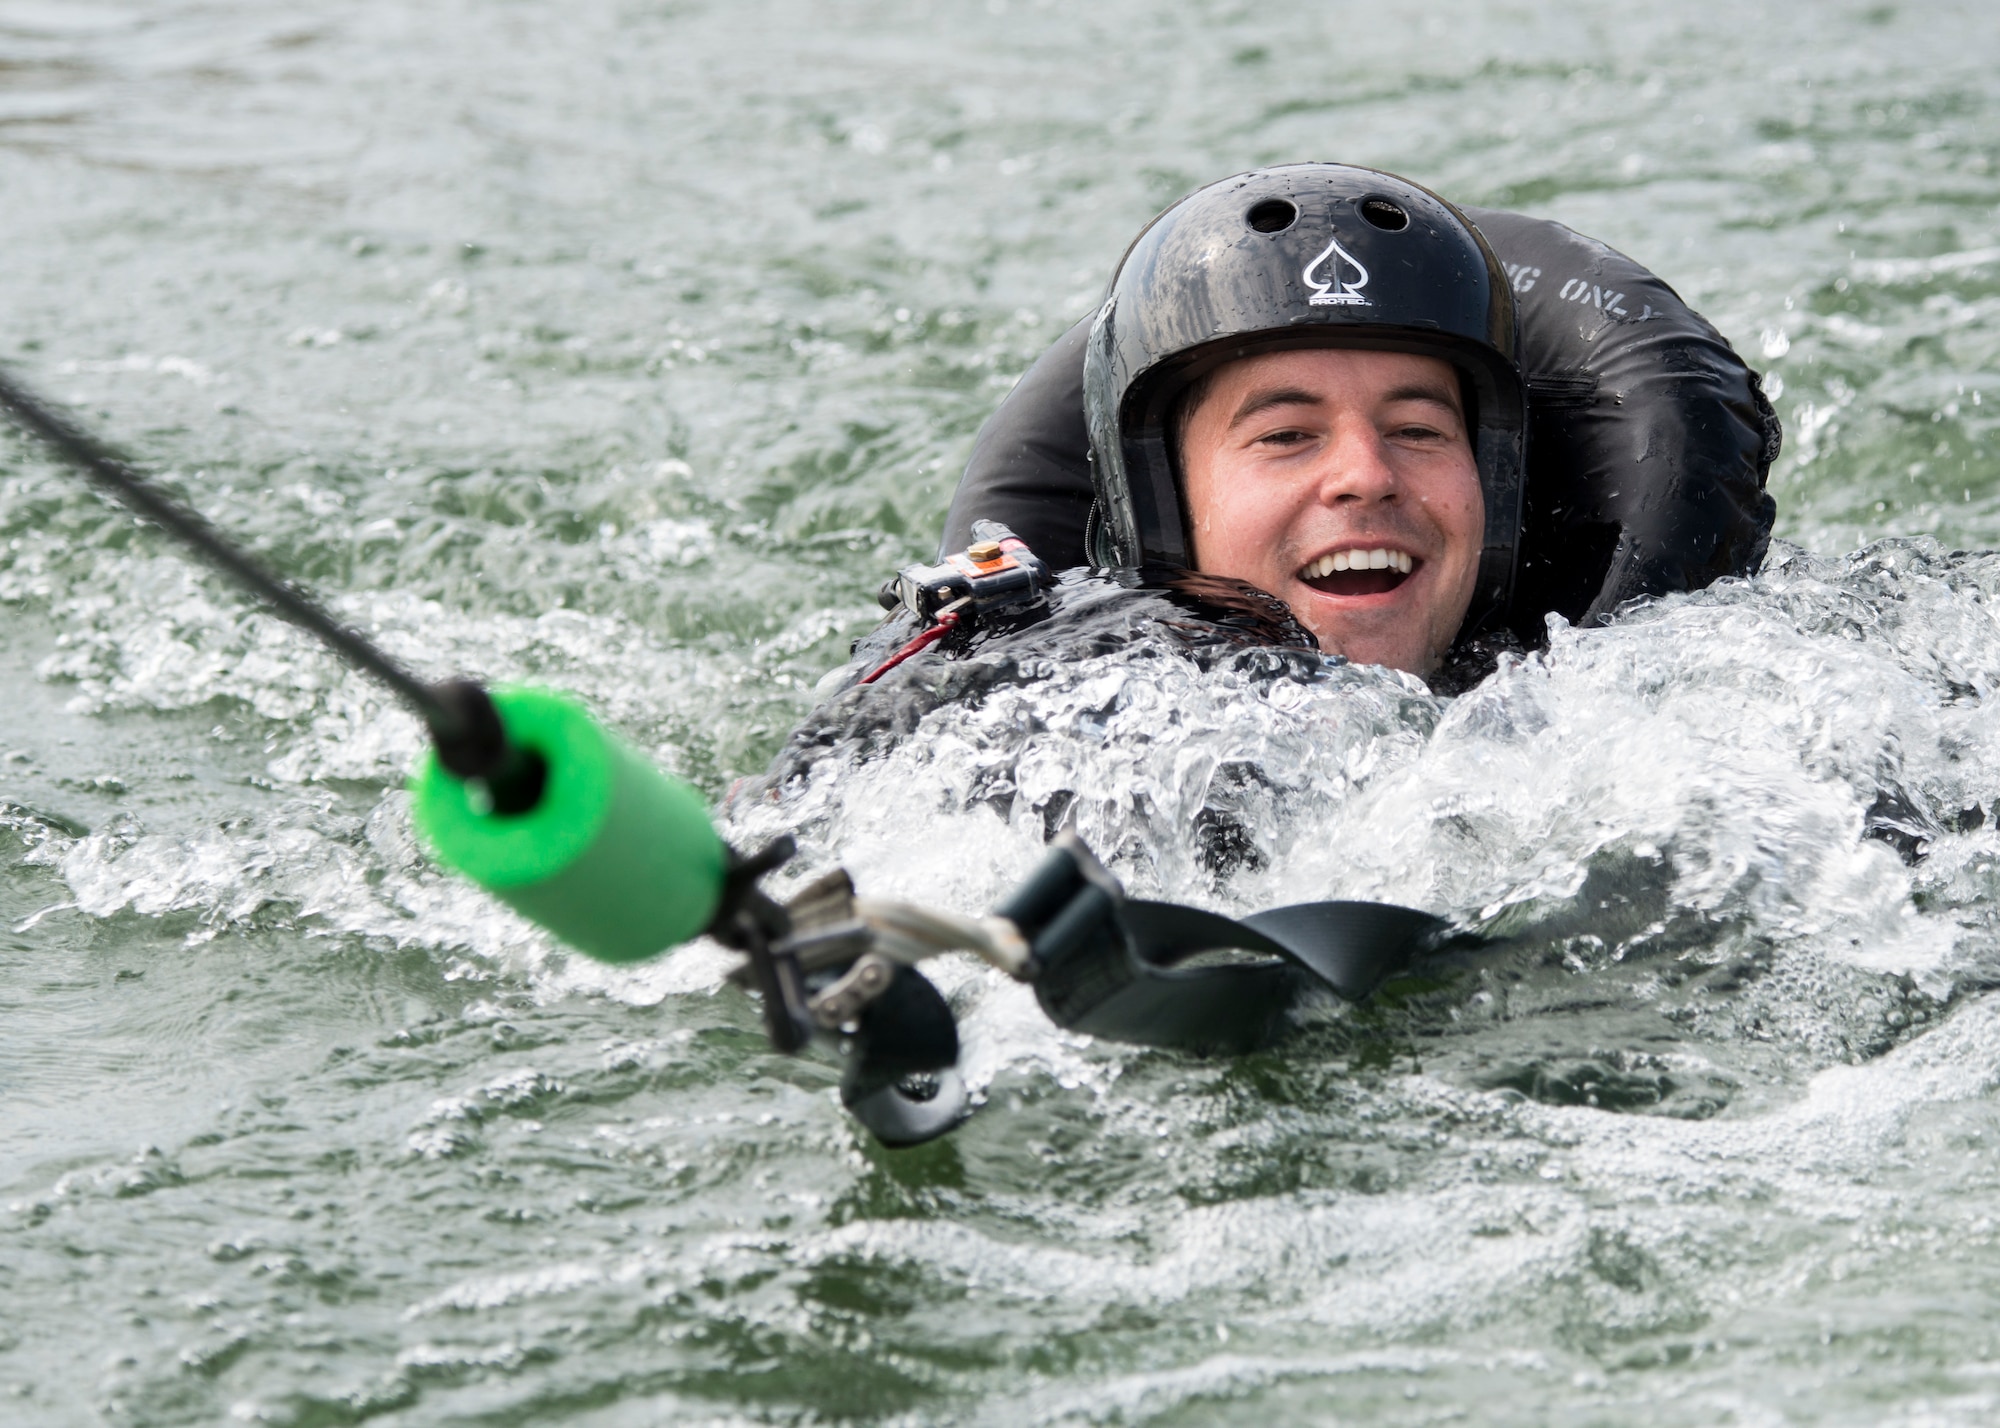 A 389th Fighter Squadron aircrew member is dragged behind a boat during water survival training Aug. 06, 2019, at C.J. Strike Reservoir, Idaho. This portion of the training allows pilots to practice unhooking the parachute from the safety harness as they are dragged by the wind. (U.S. Air Force photo by Airman Antwain L. Hanks)